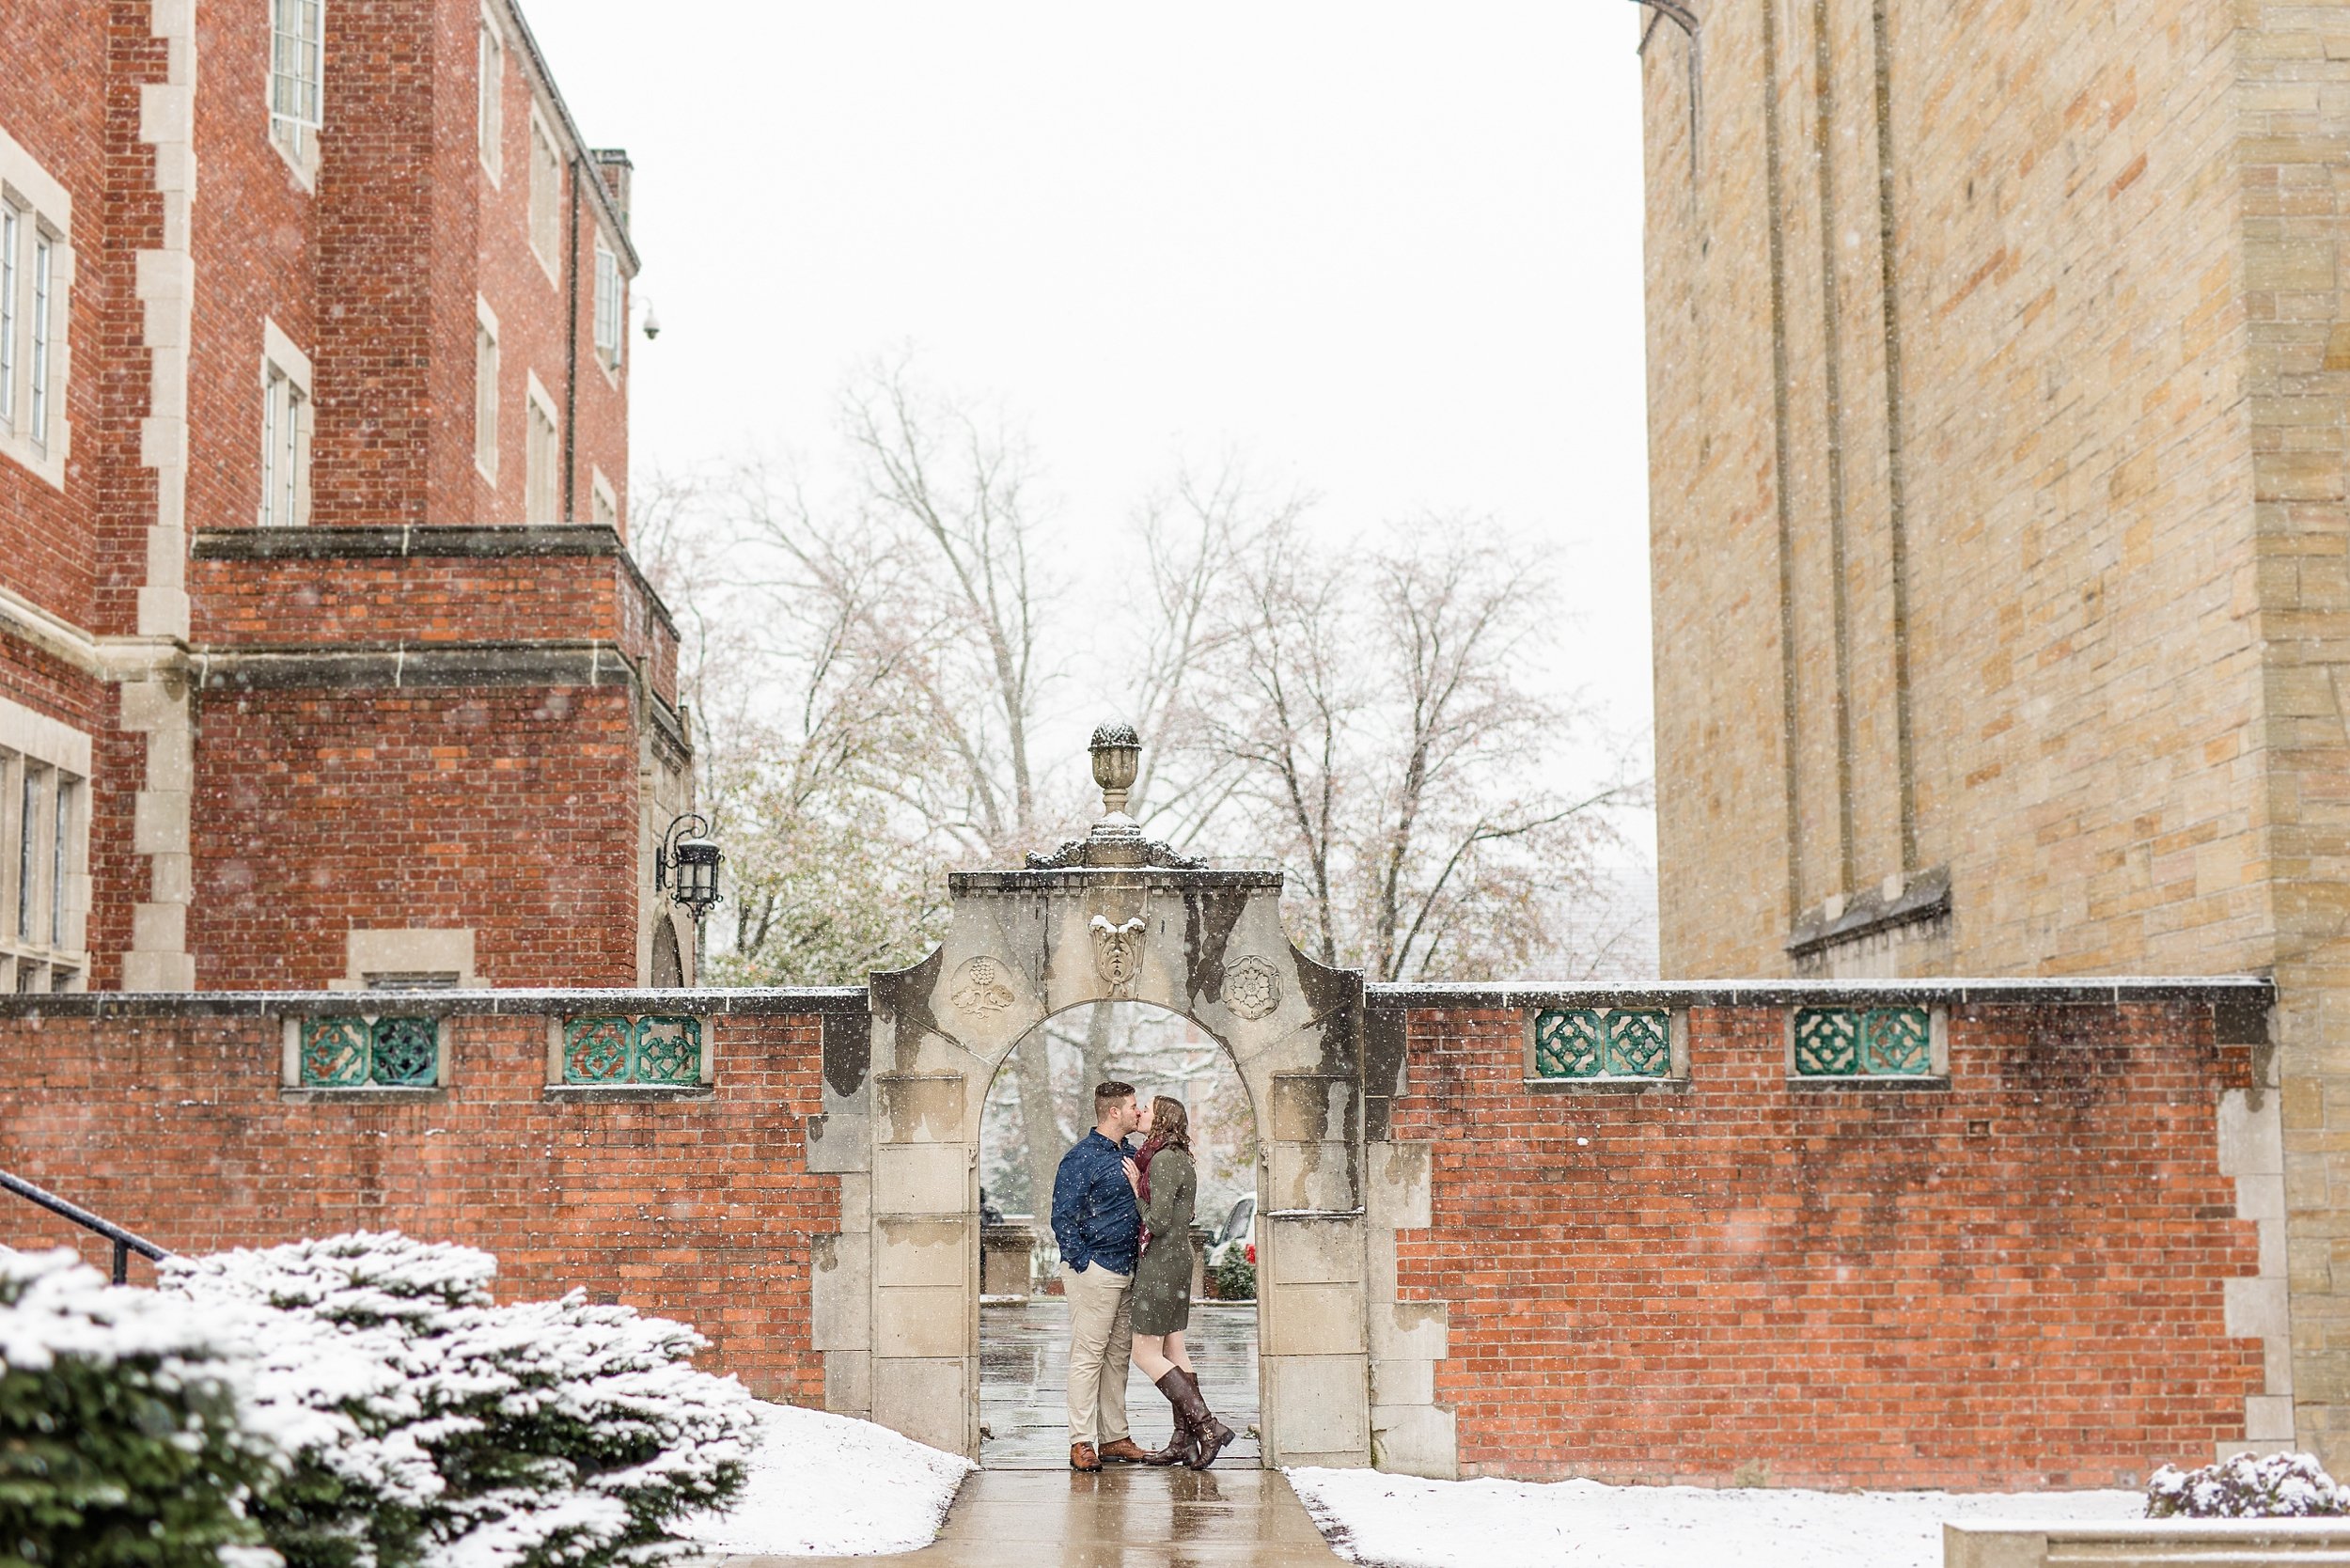  Engagement photos in a (somewhat surprise) snow storm! We knew it was going to snow, but I don’t think any of us knew how heavy that snow would be. Thankfully - these two went for it! And thankfully I had a willing husband to hold an umbrella over m